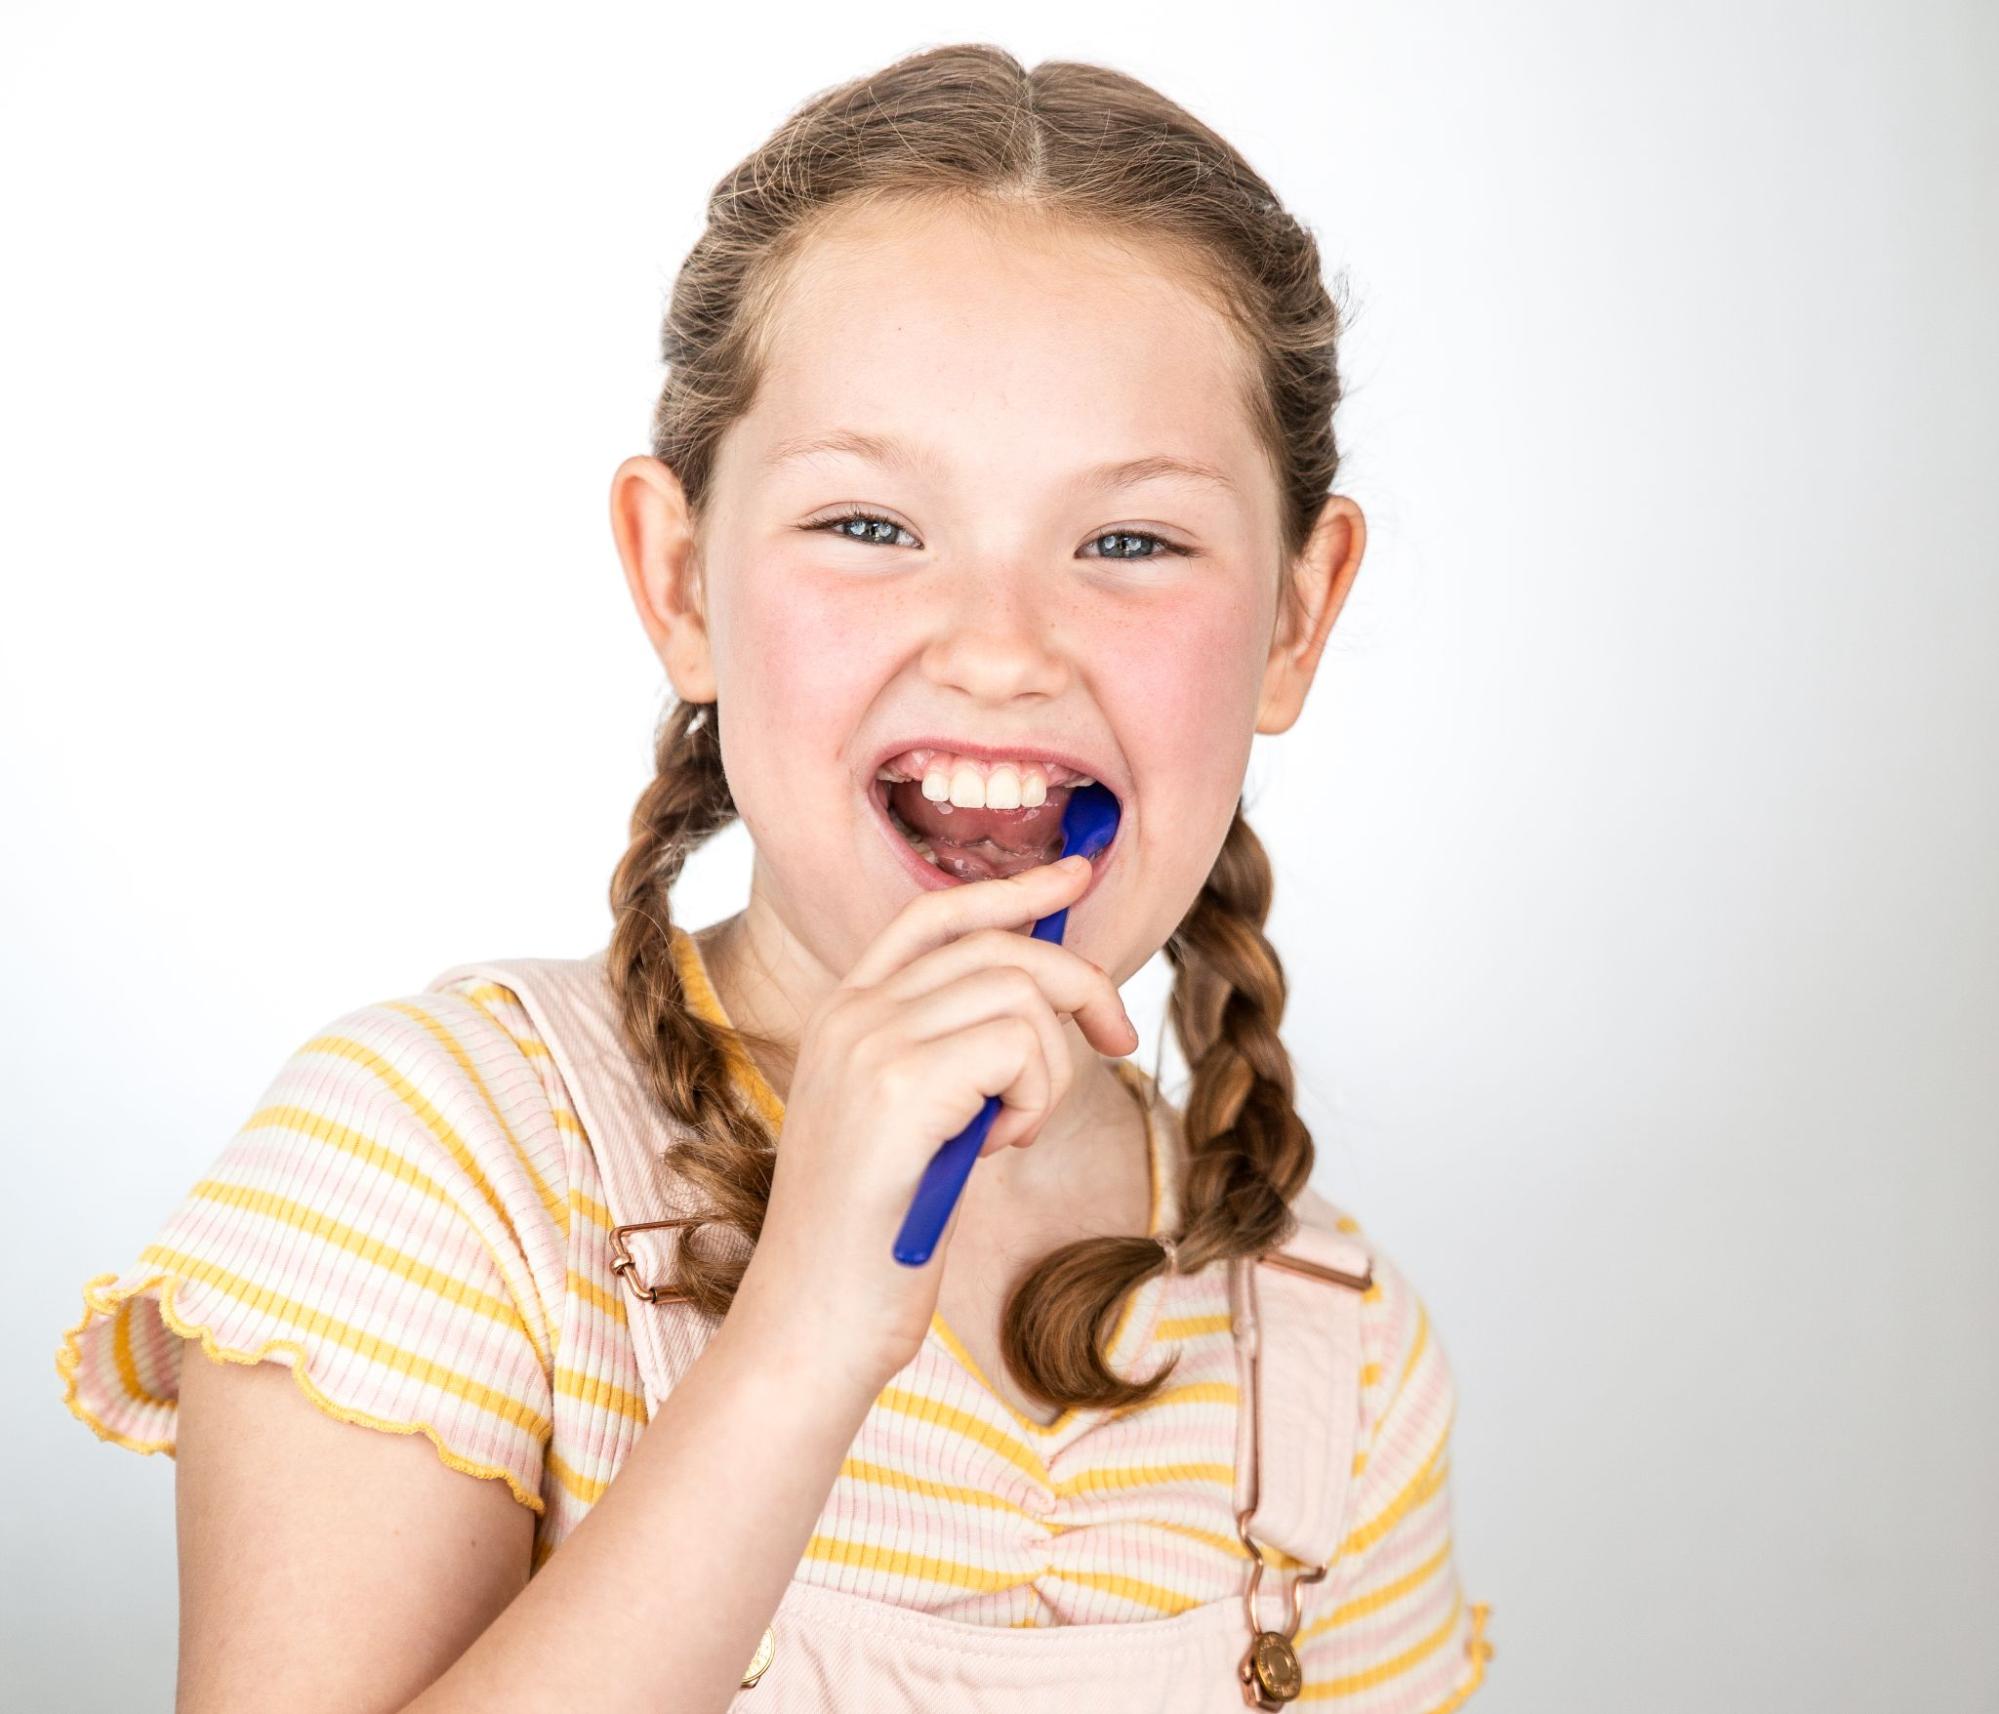 How To Make Braces Care Fun for Kids